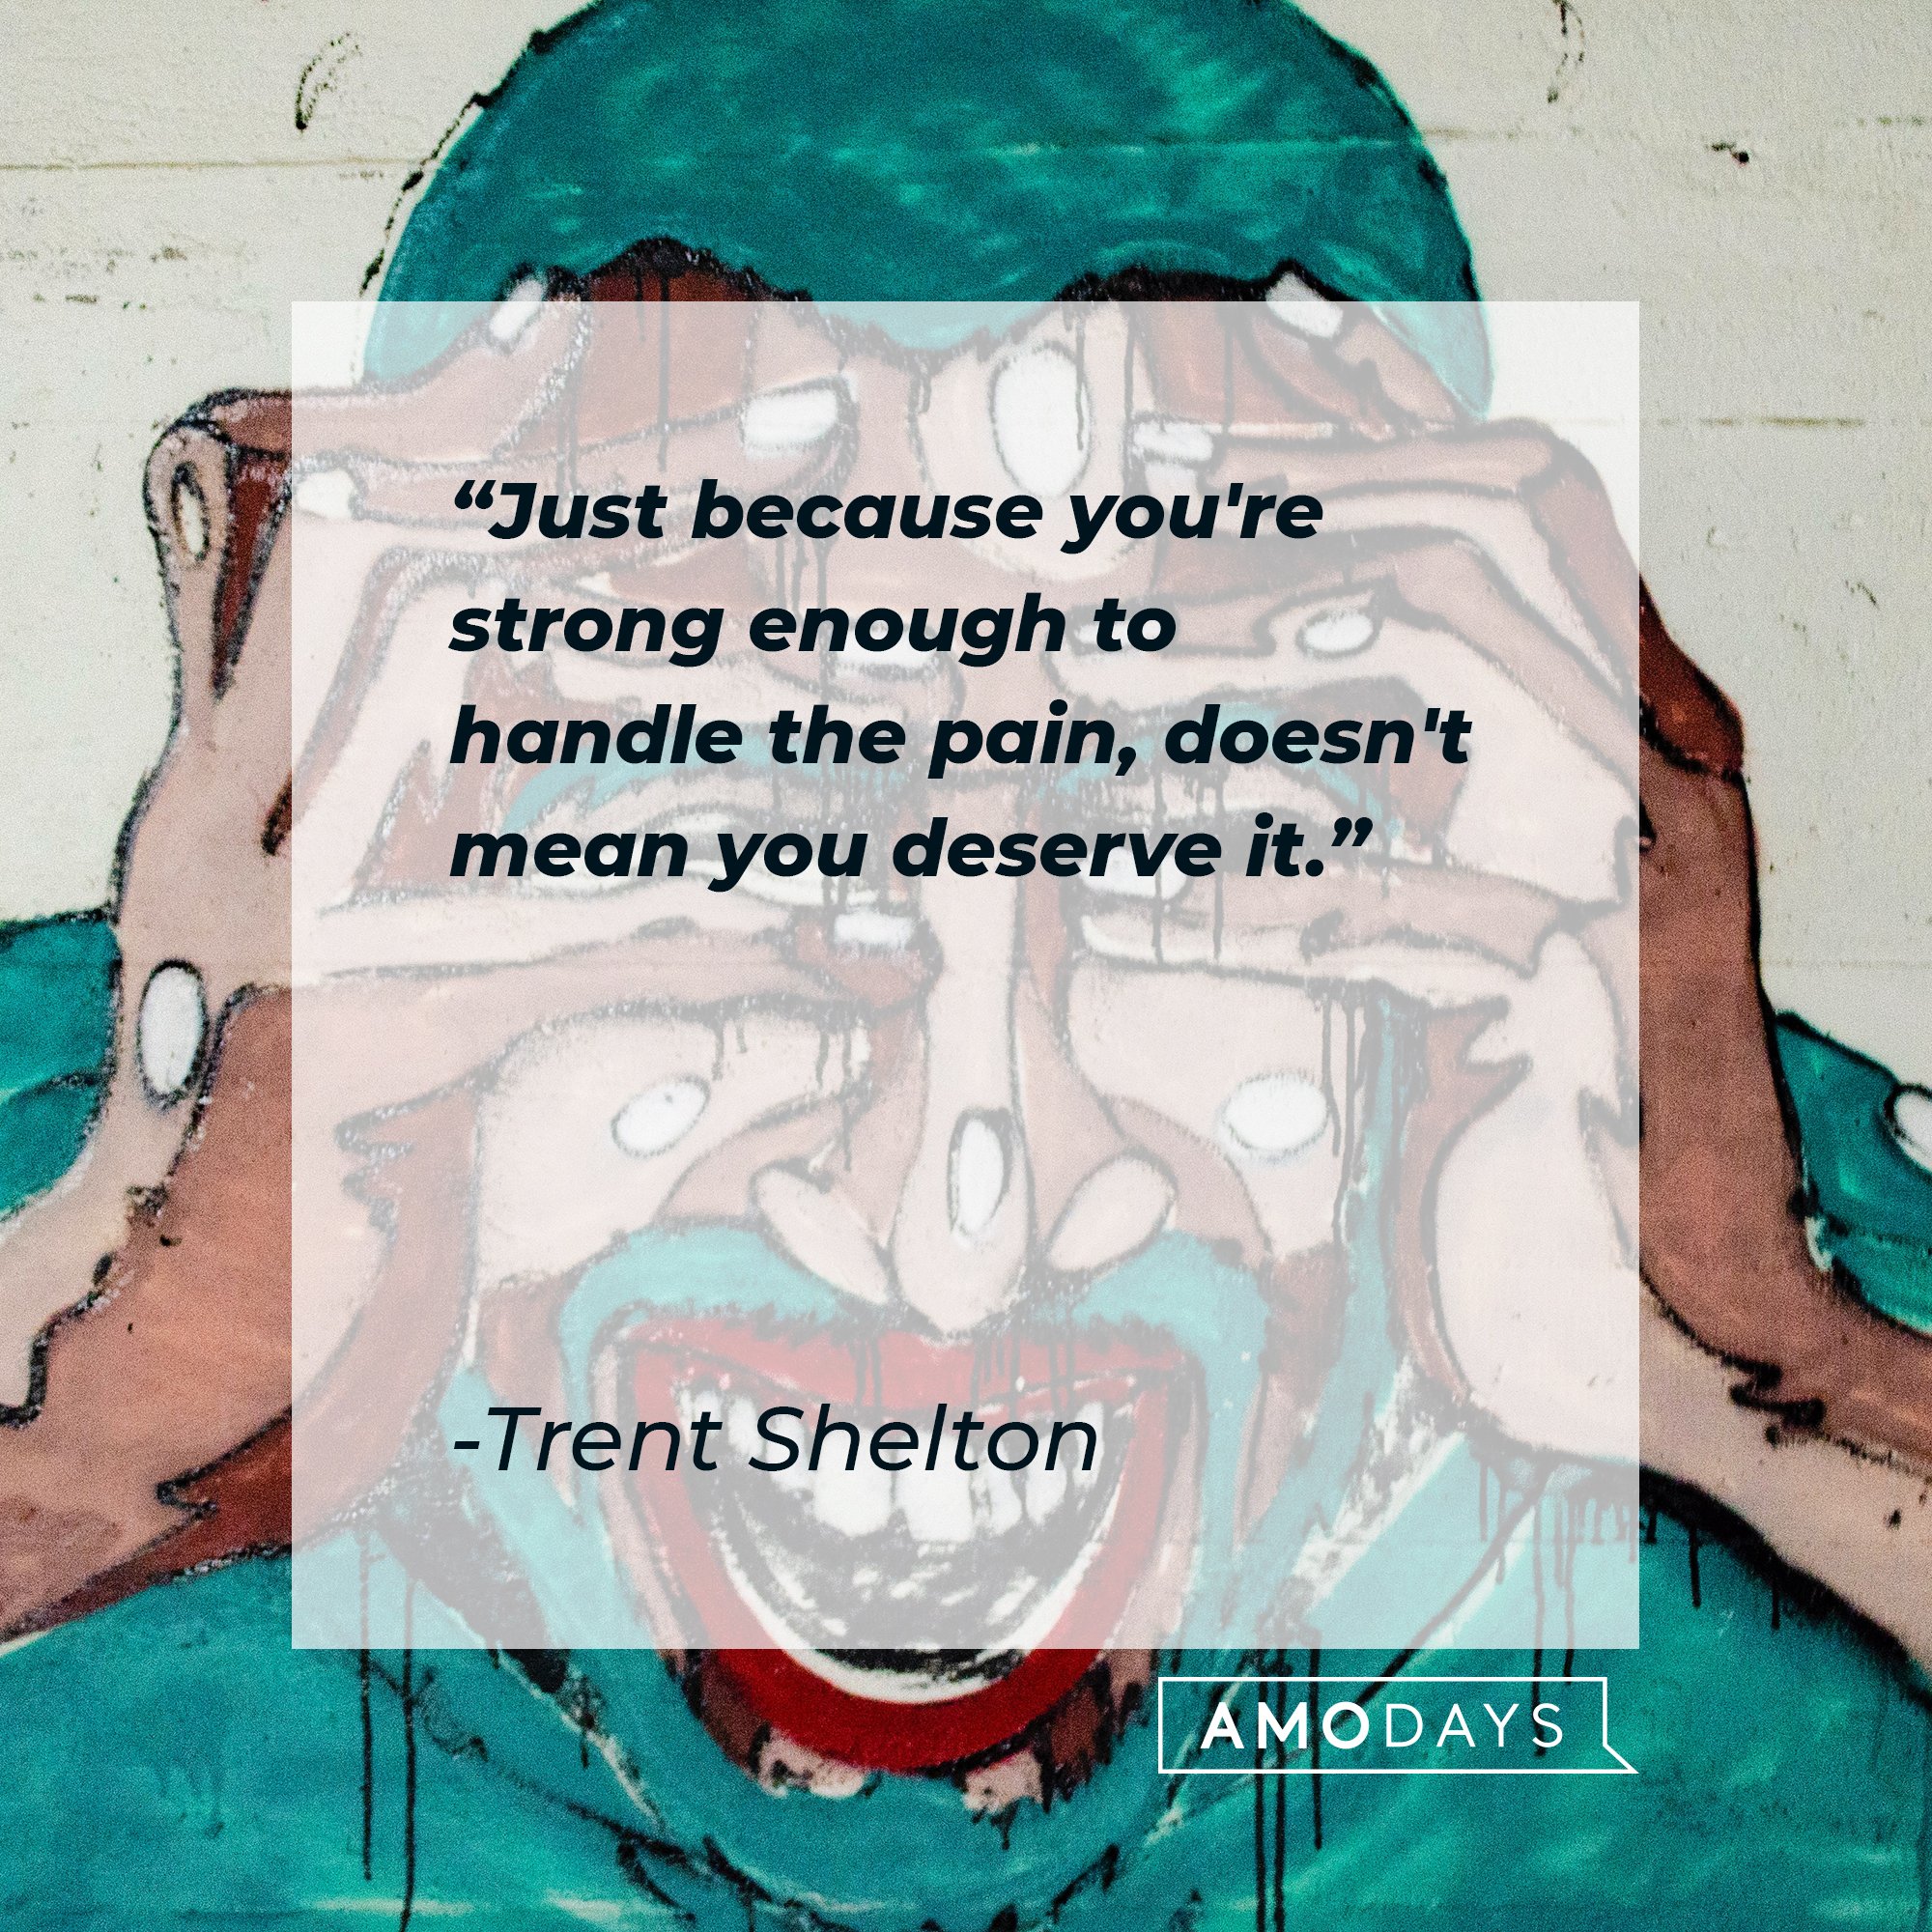 Trent Shelton's quote: "Just because you're strong enough to handle the pain, doesn't mean you deserve it." | Image: AmoDays